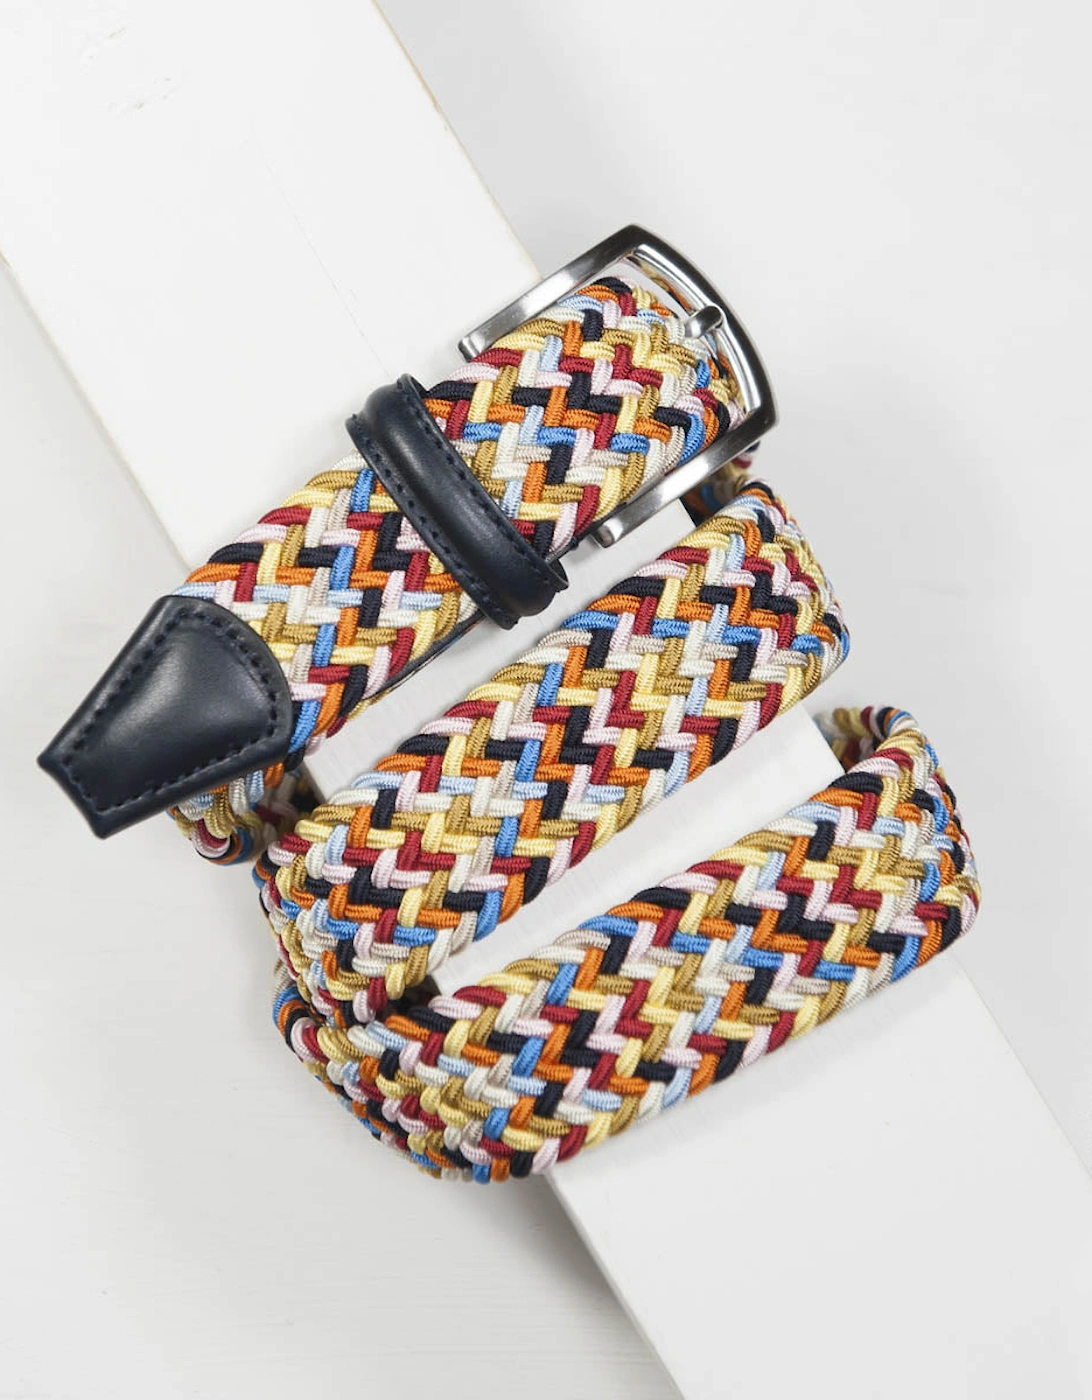 Andersons Woven Textile Belt - Navy/Blue/White/Yellow/Pink 3.5cm